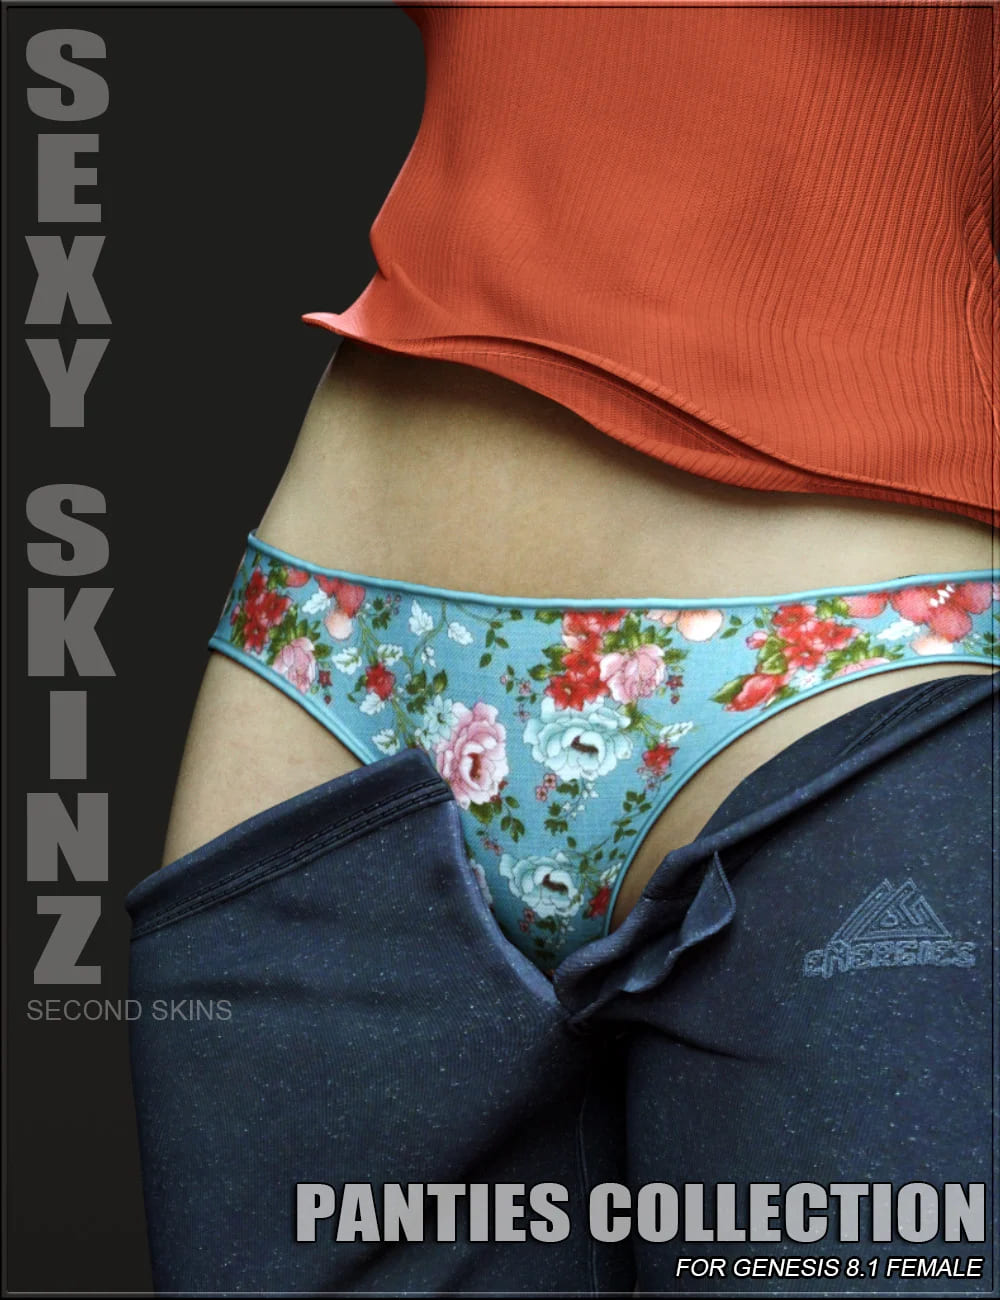 Sexy Skinz – Panties Collection for Genesis 8.1 Females_DAZ3D下载站